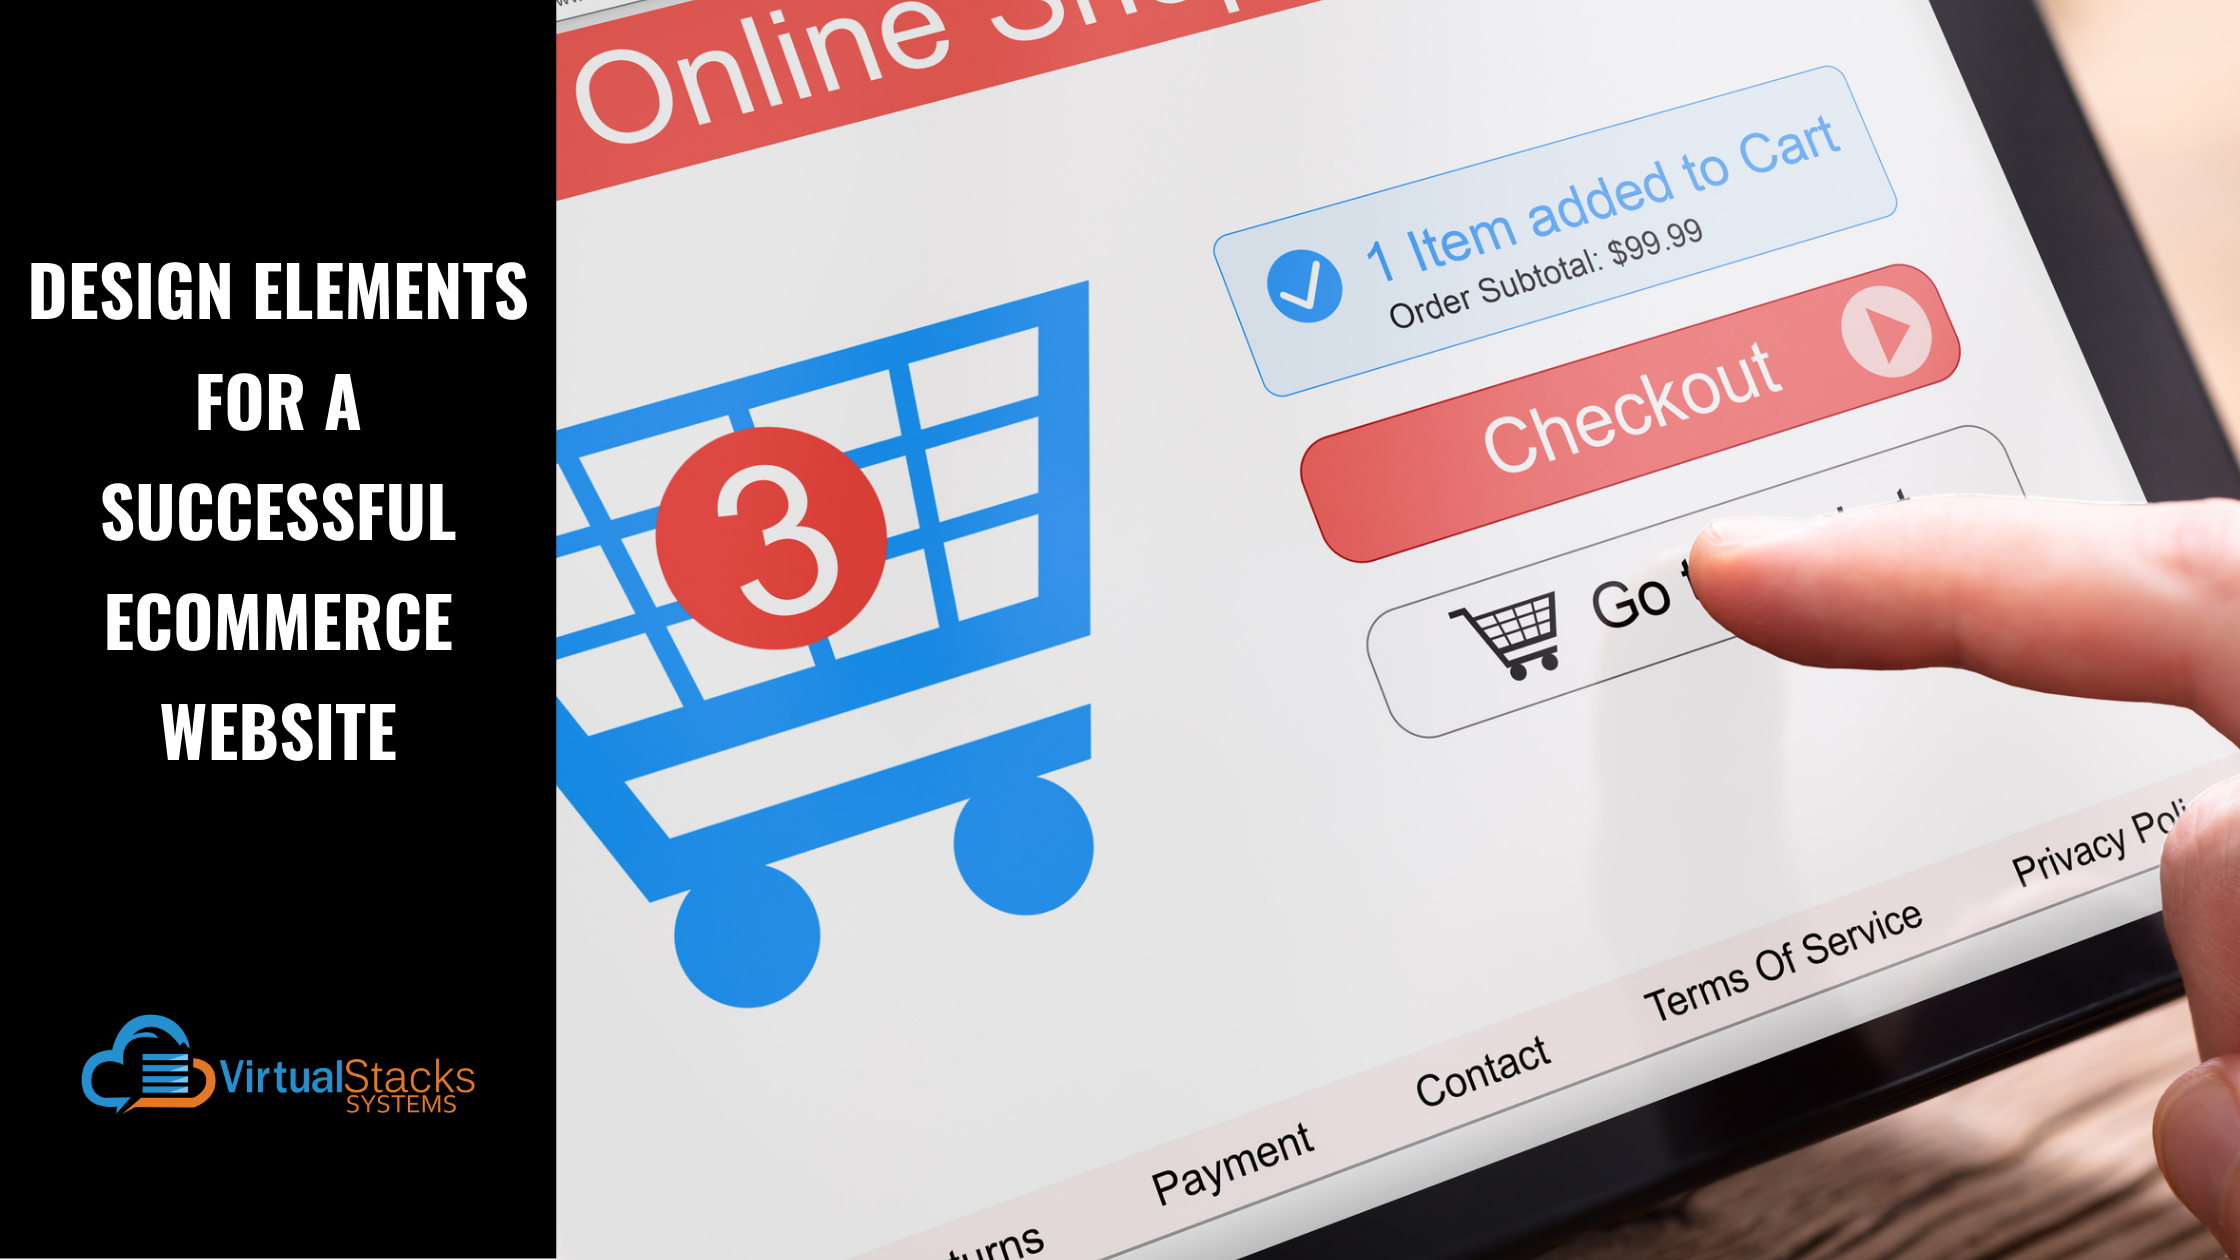 Design Elements for a Successful Ecommerce Website